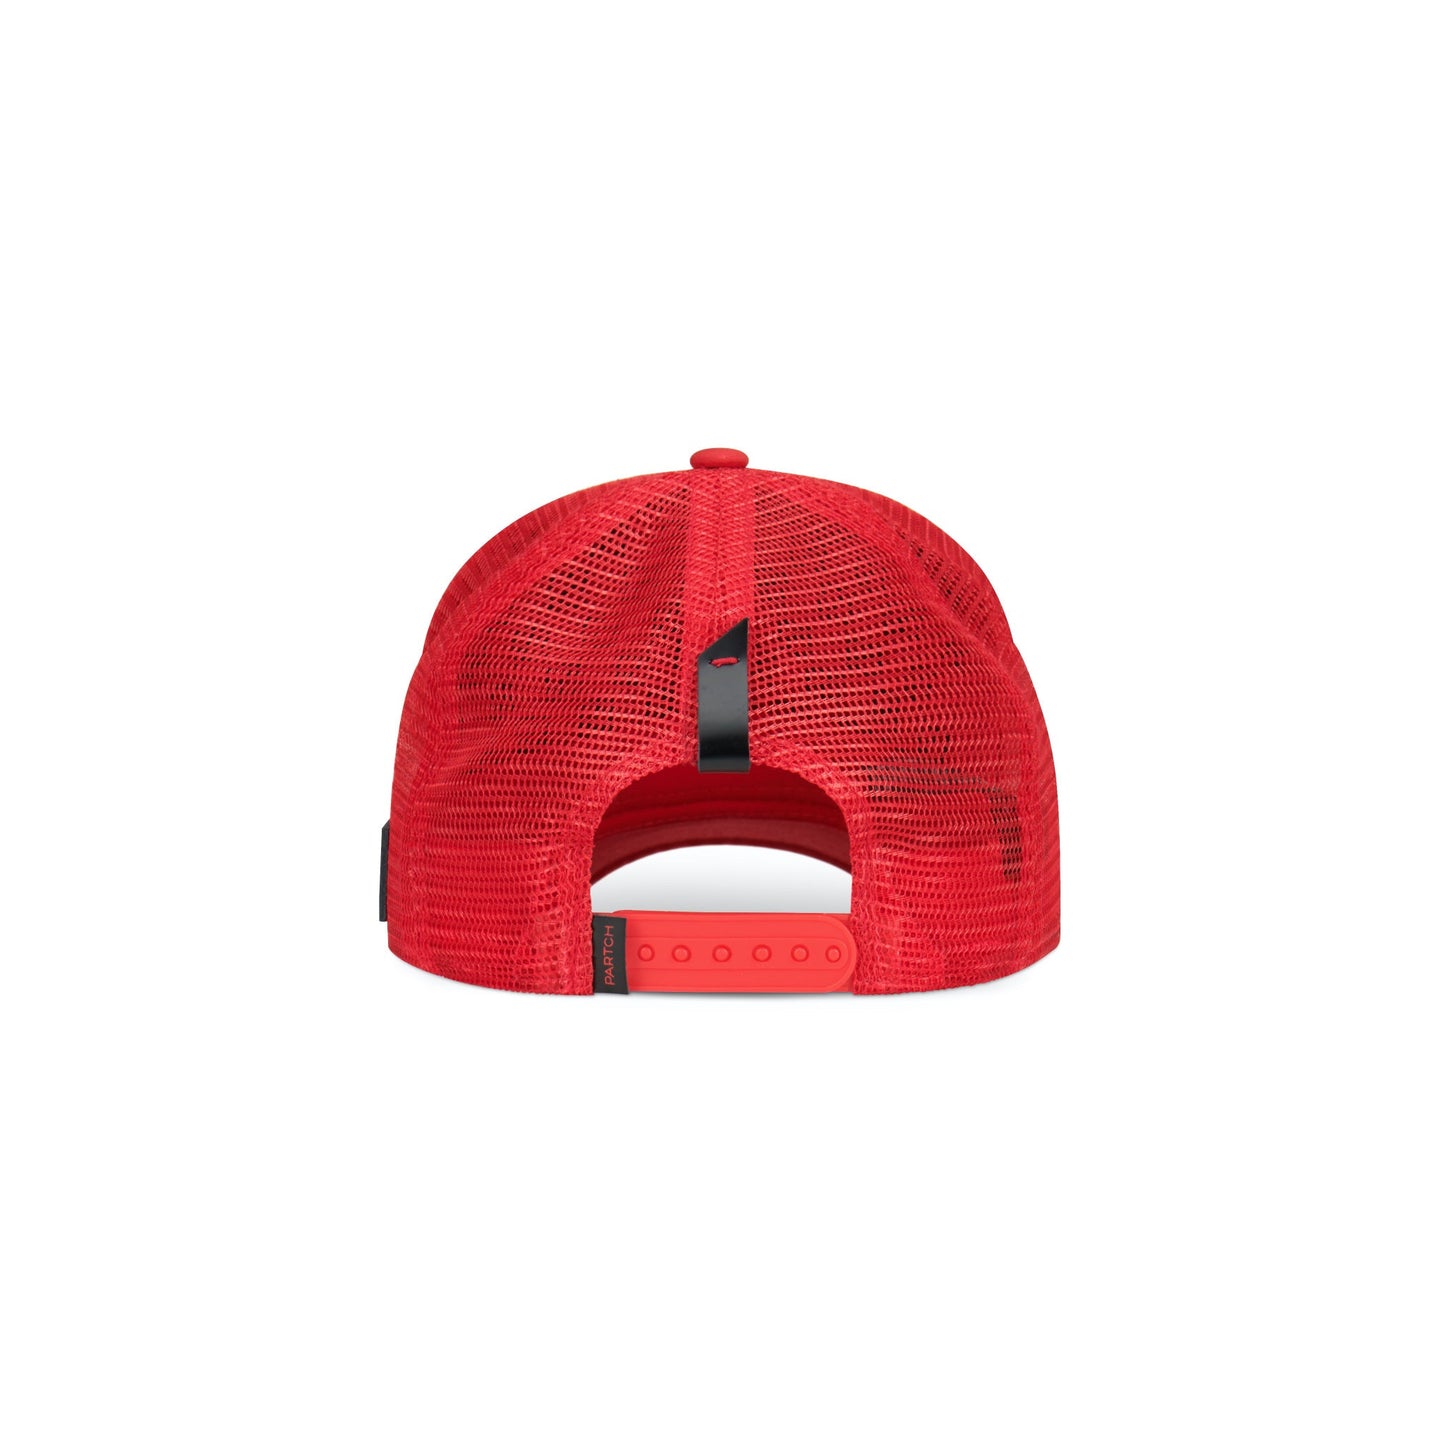 Partch Trucker Hat Red with PARTCH-Clip Unixvi Back View